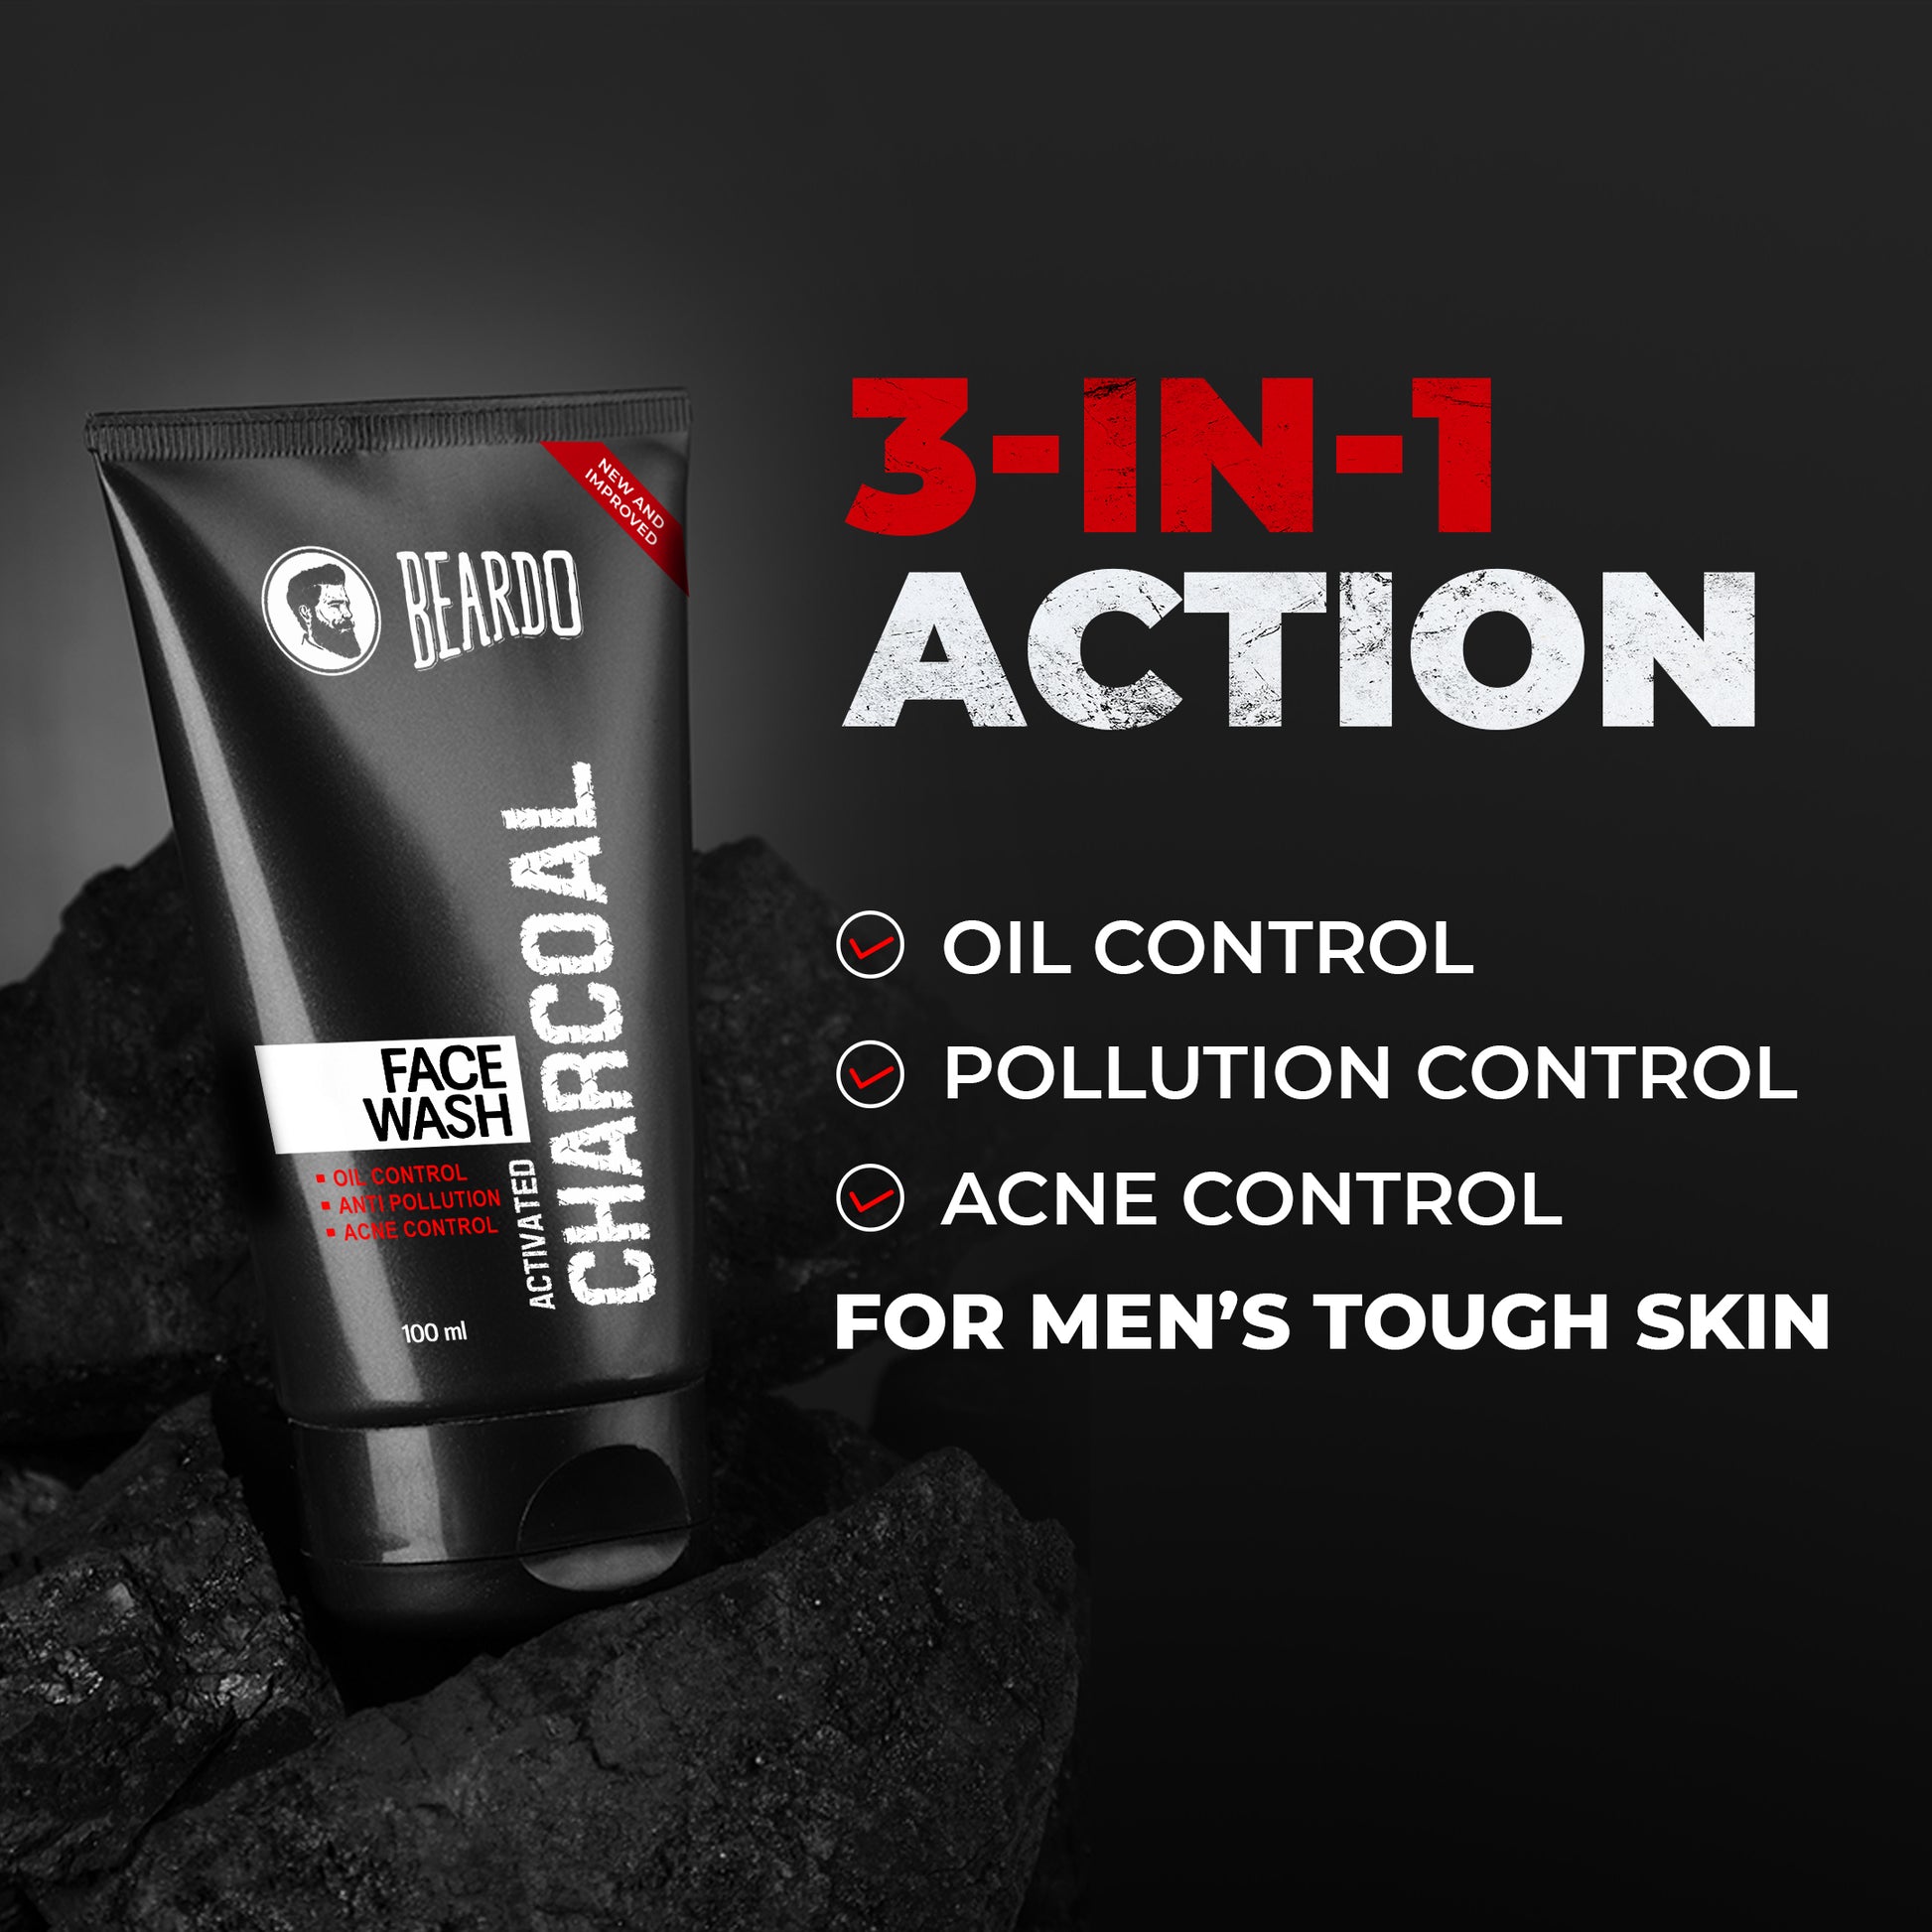 3 in 1 action, acne control, oil control, pollution control